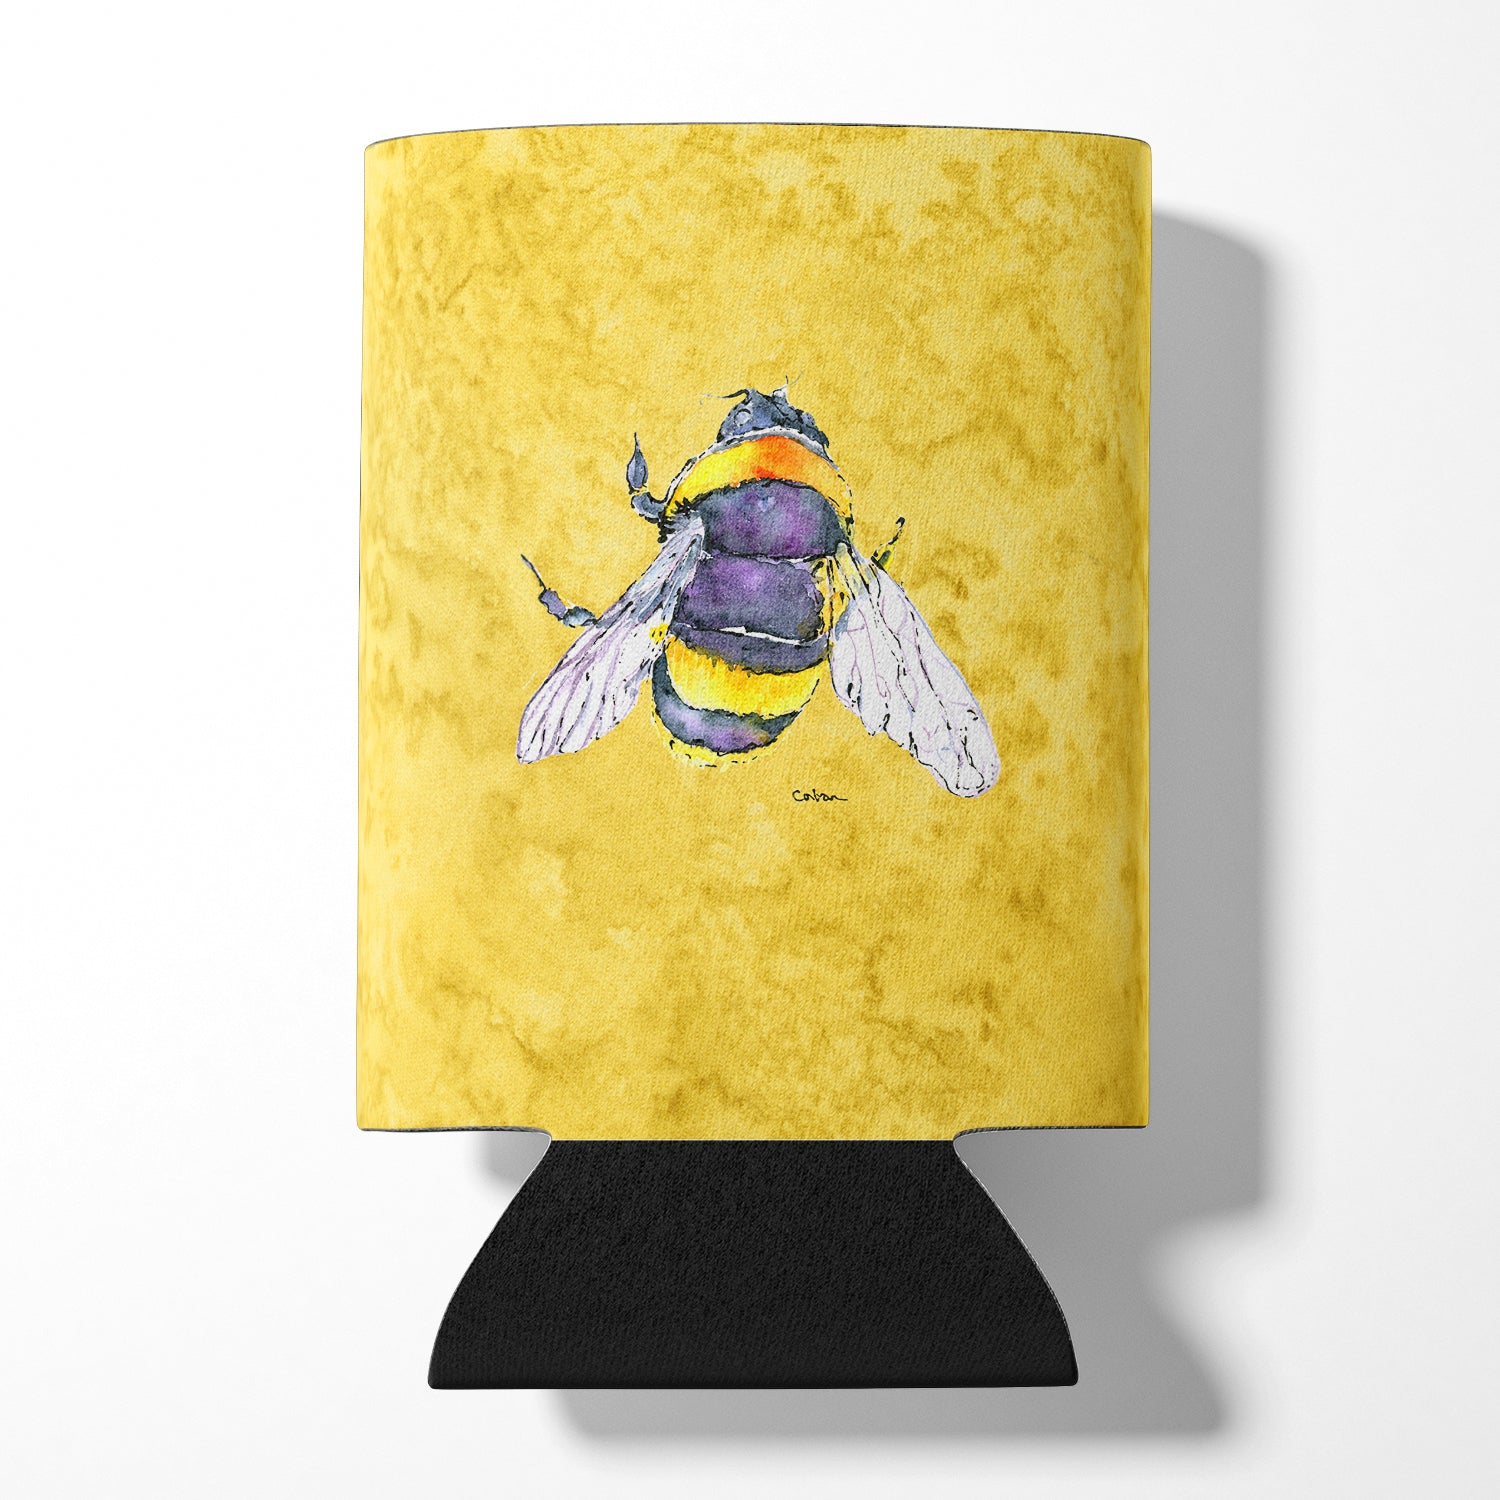 Bee on Yellow Can or Bottle Beverage Insulator Hugger.